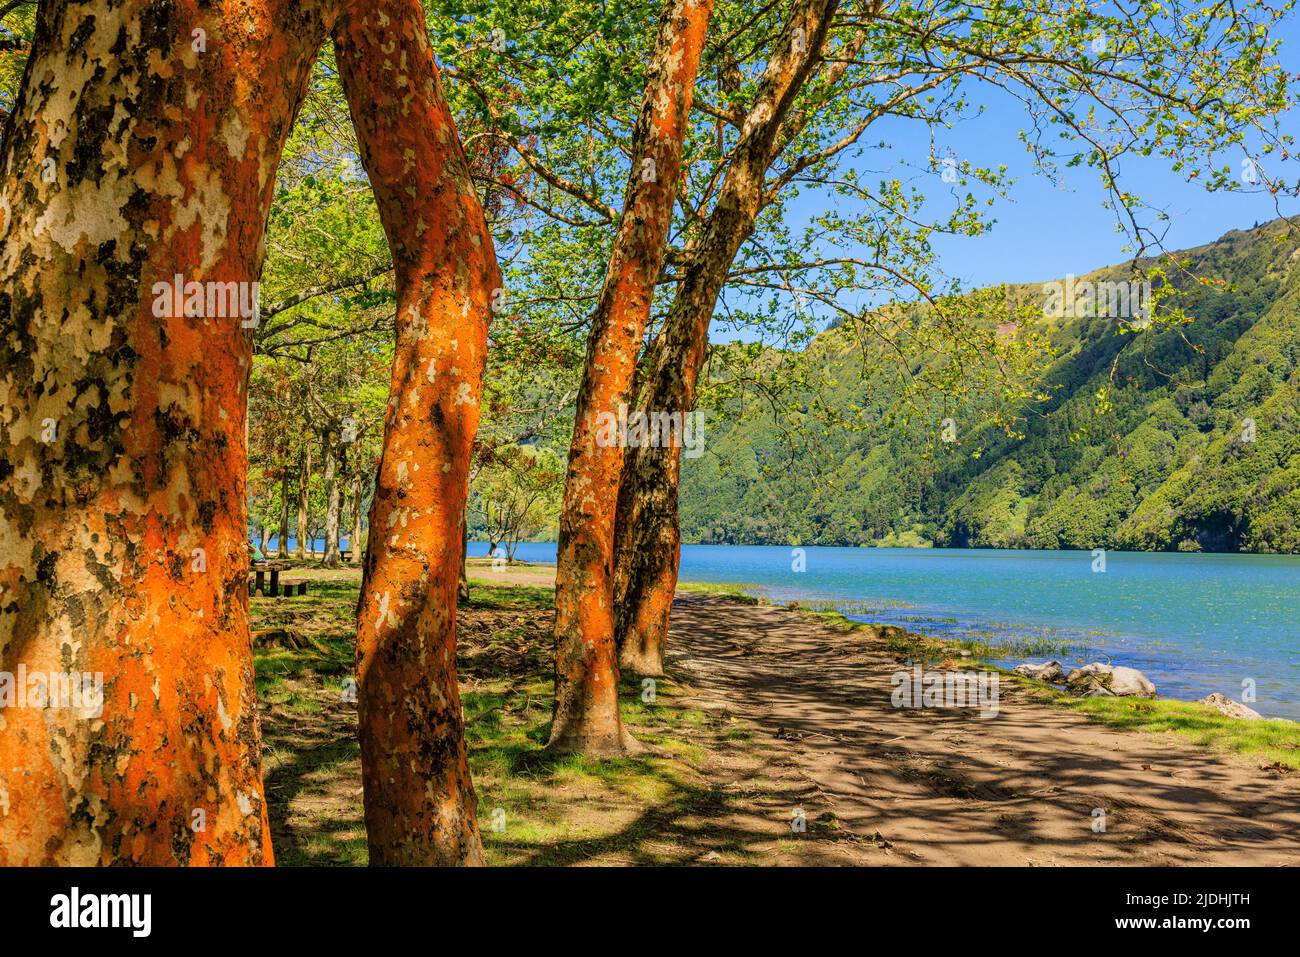 an idyllic setting the banks of lagao azul sete cidades with orange bark of a row of sycamores a grey pumice stone beach blue lake and green hillside Stock Photo